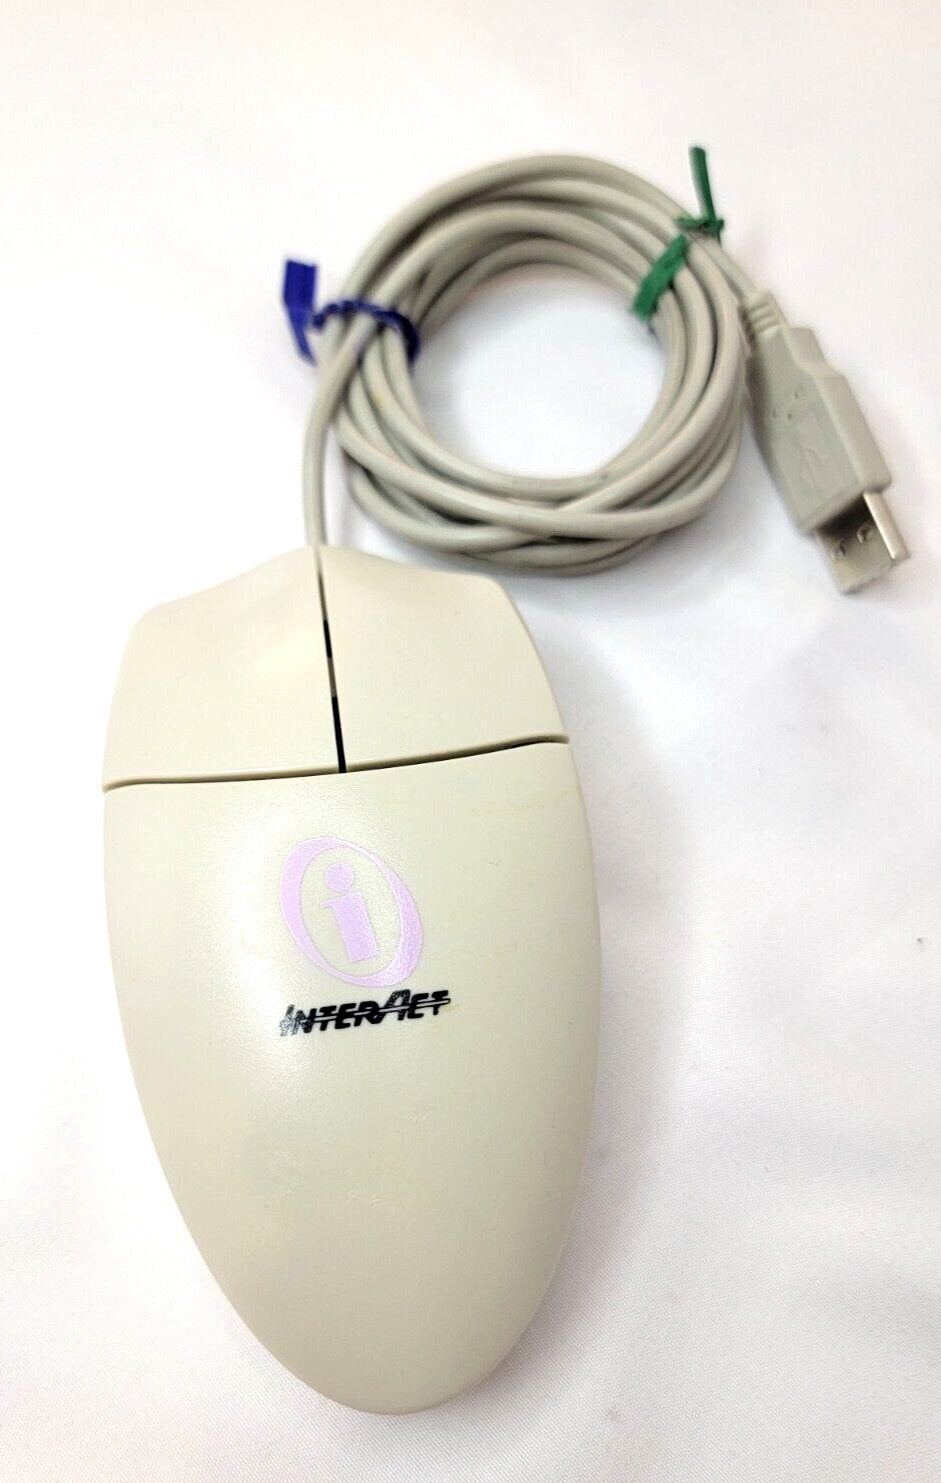 Vintage Inter Act Roller ball computer mouse - **WORKING*